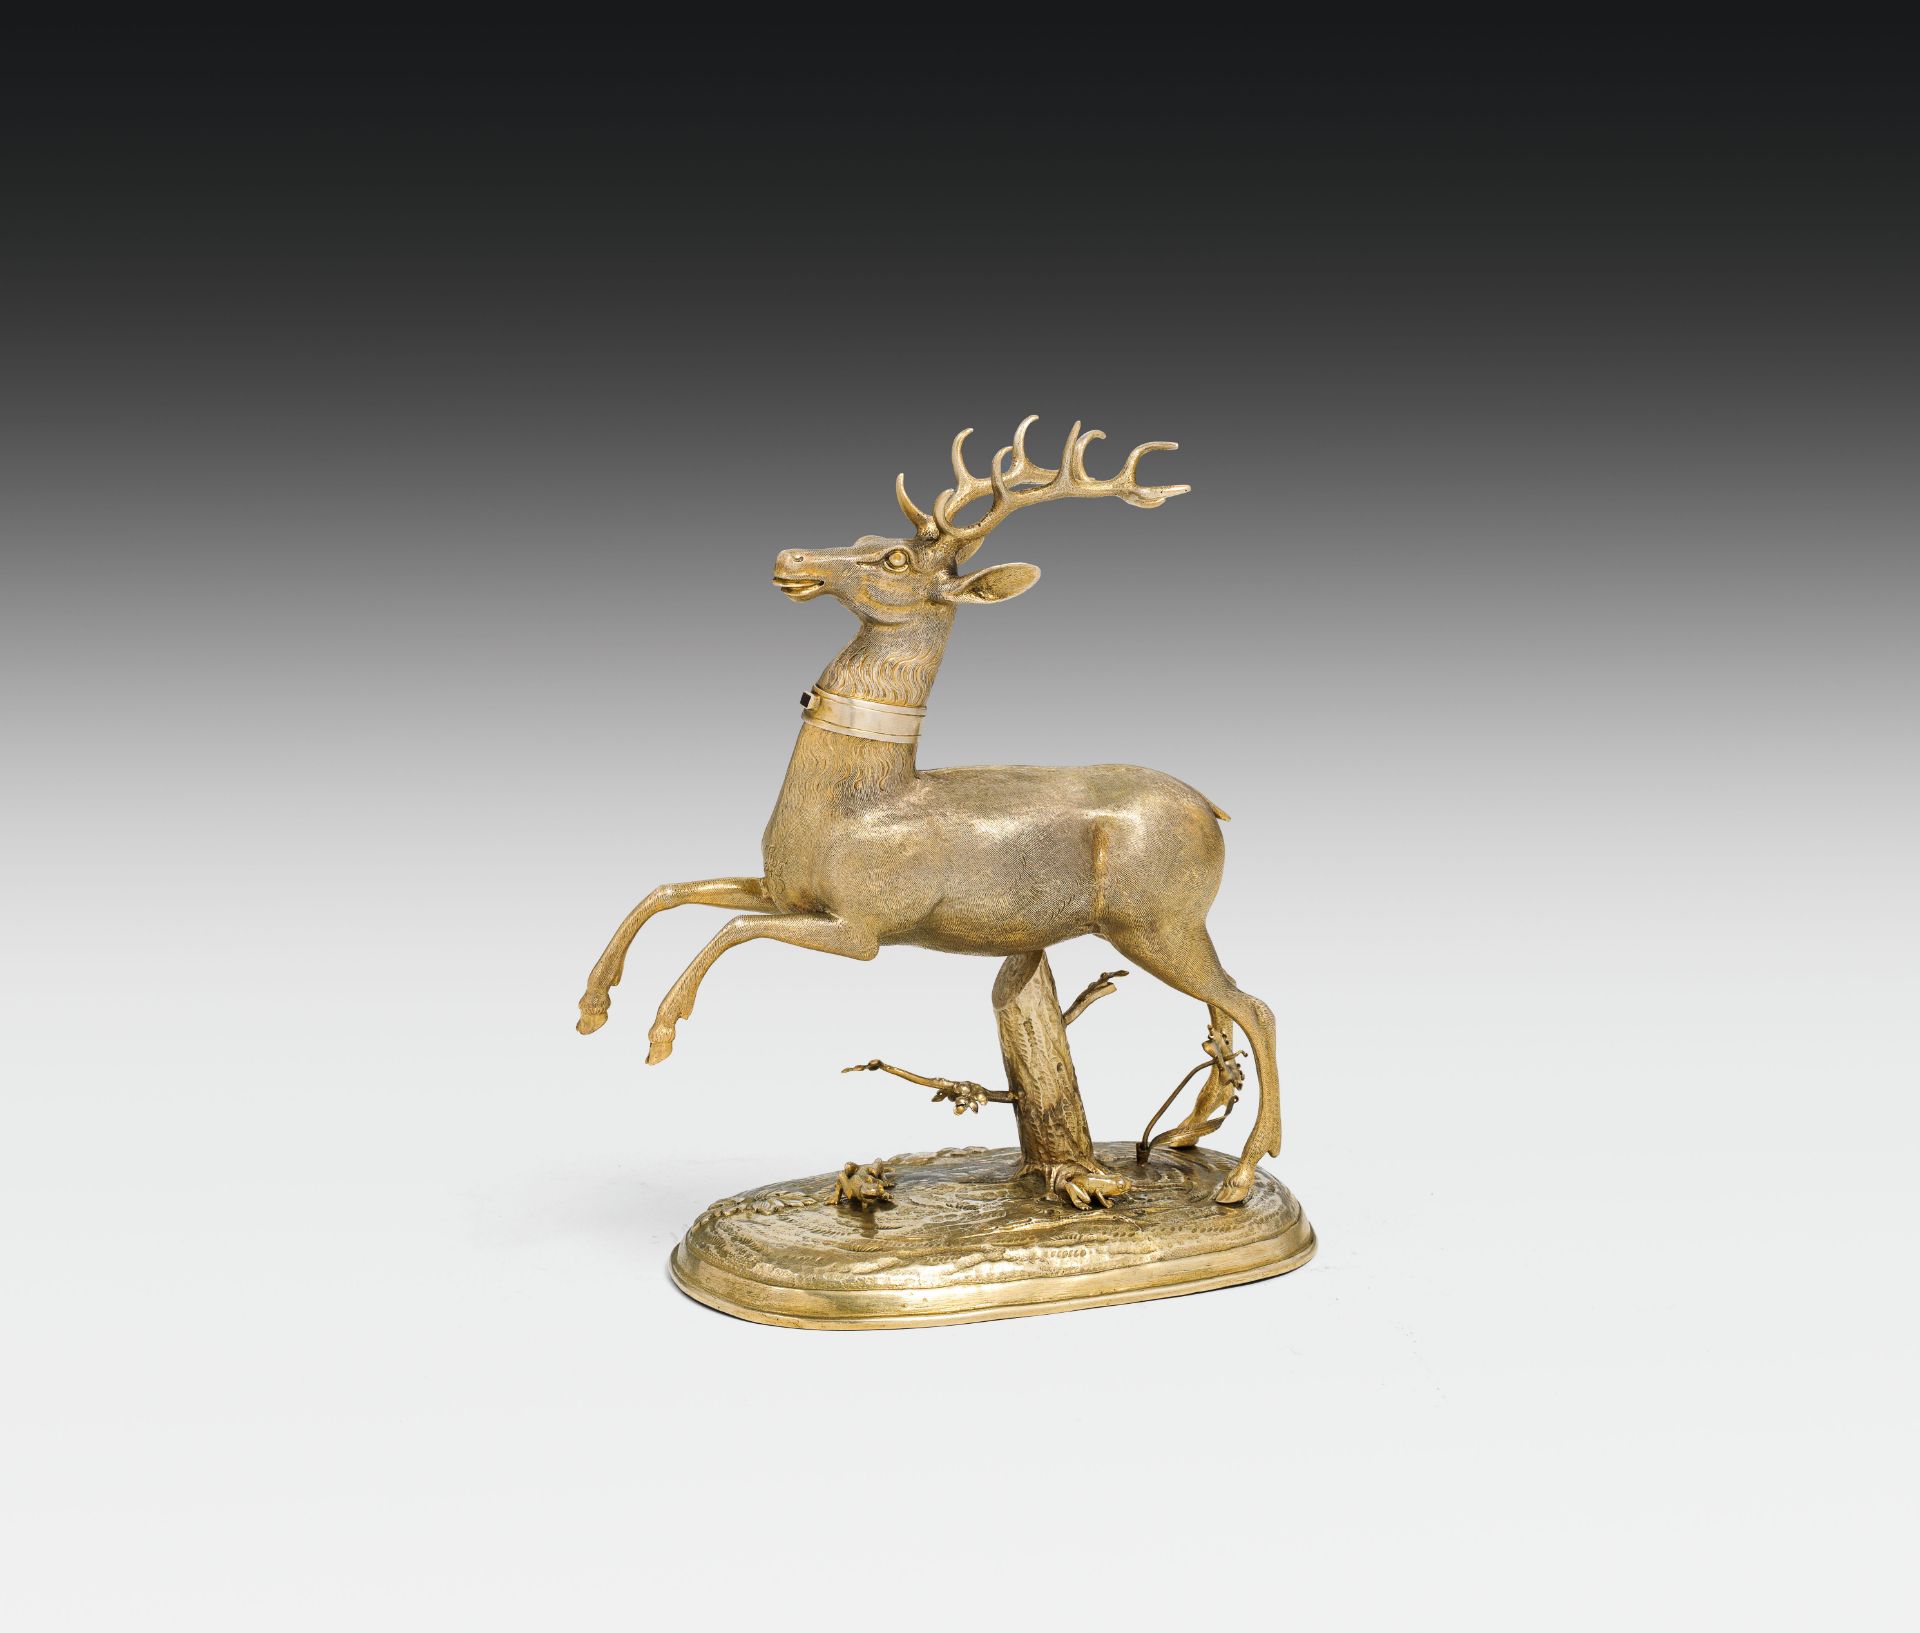 Drinking vessel "Hirsch"gilded silver; leaping stag as drinking vessel with removable head,